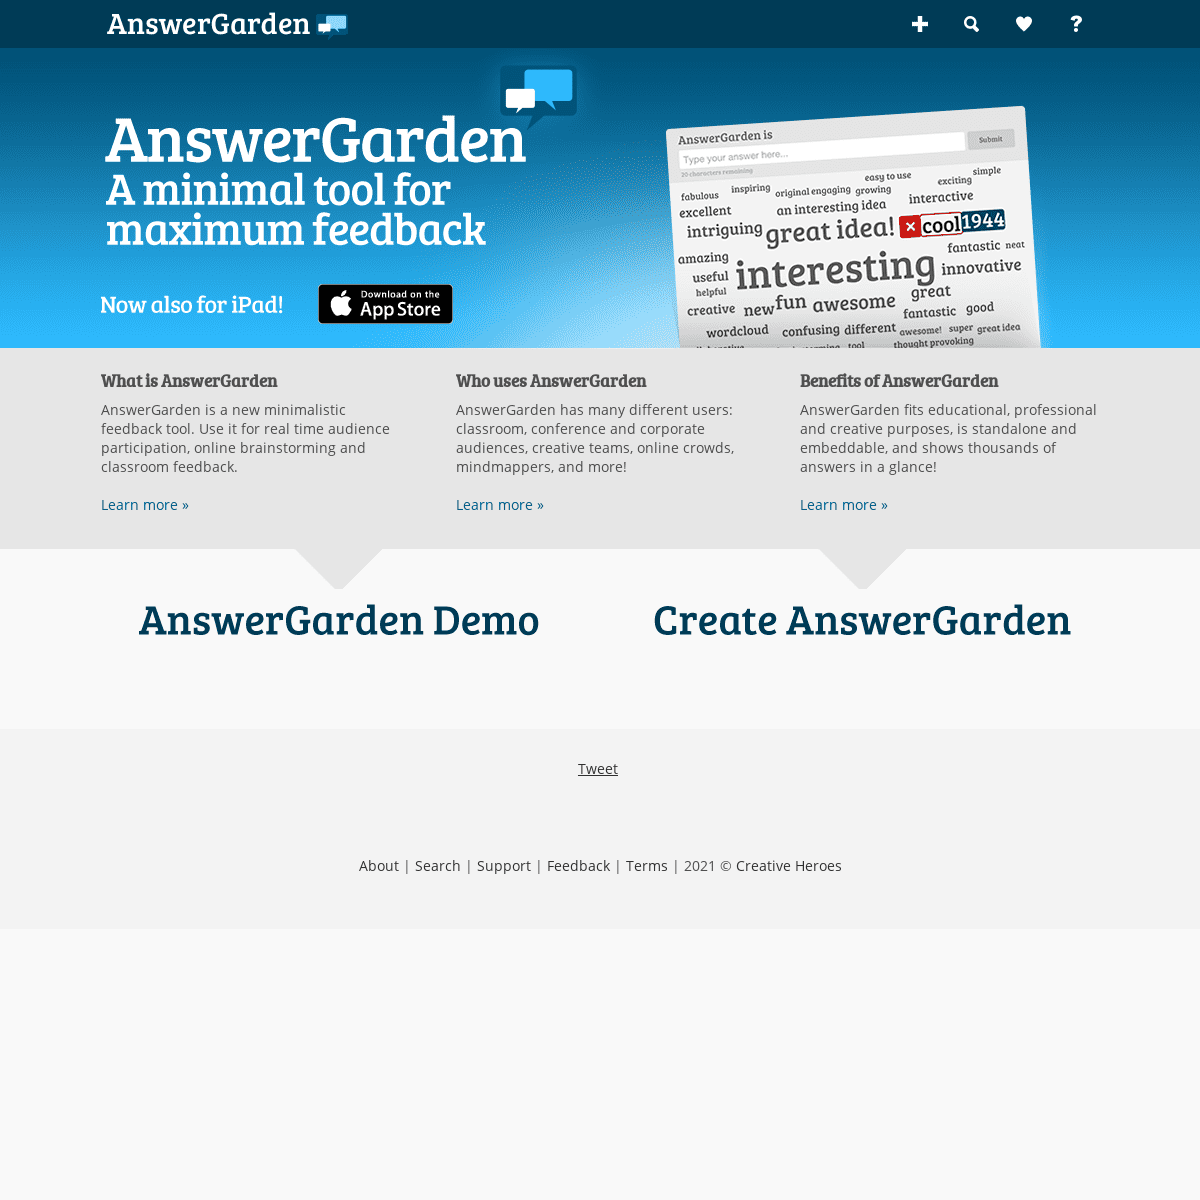 A complete backup of https://answergarden.ch